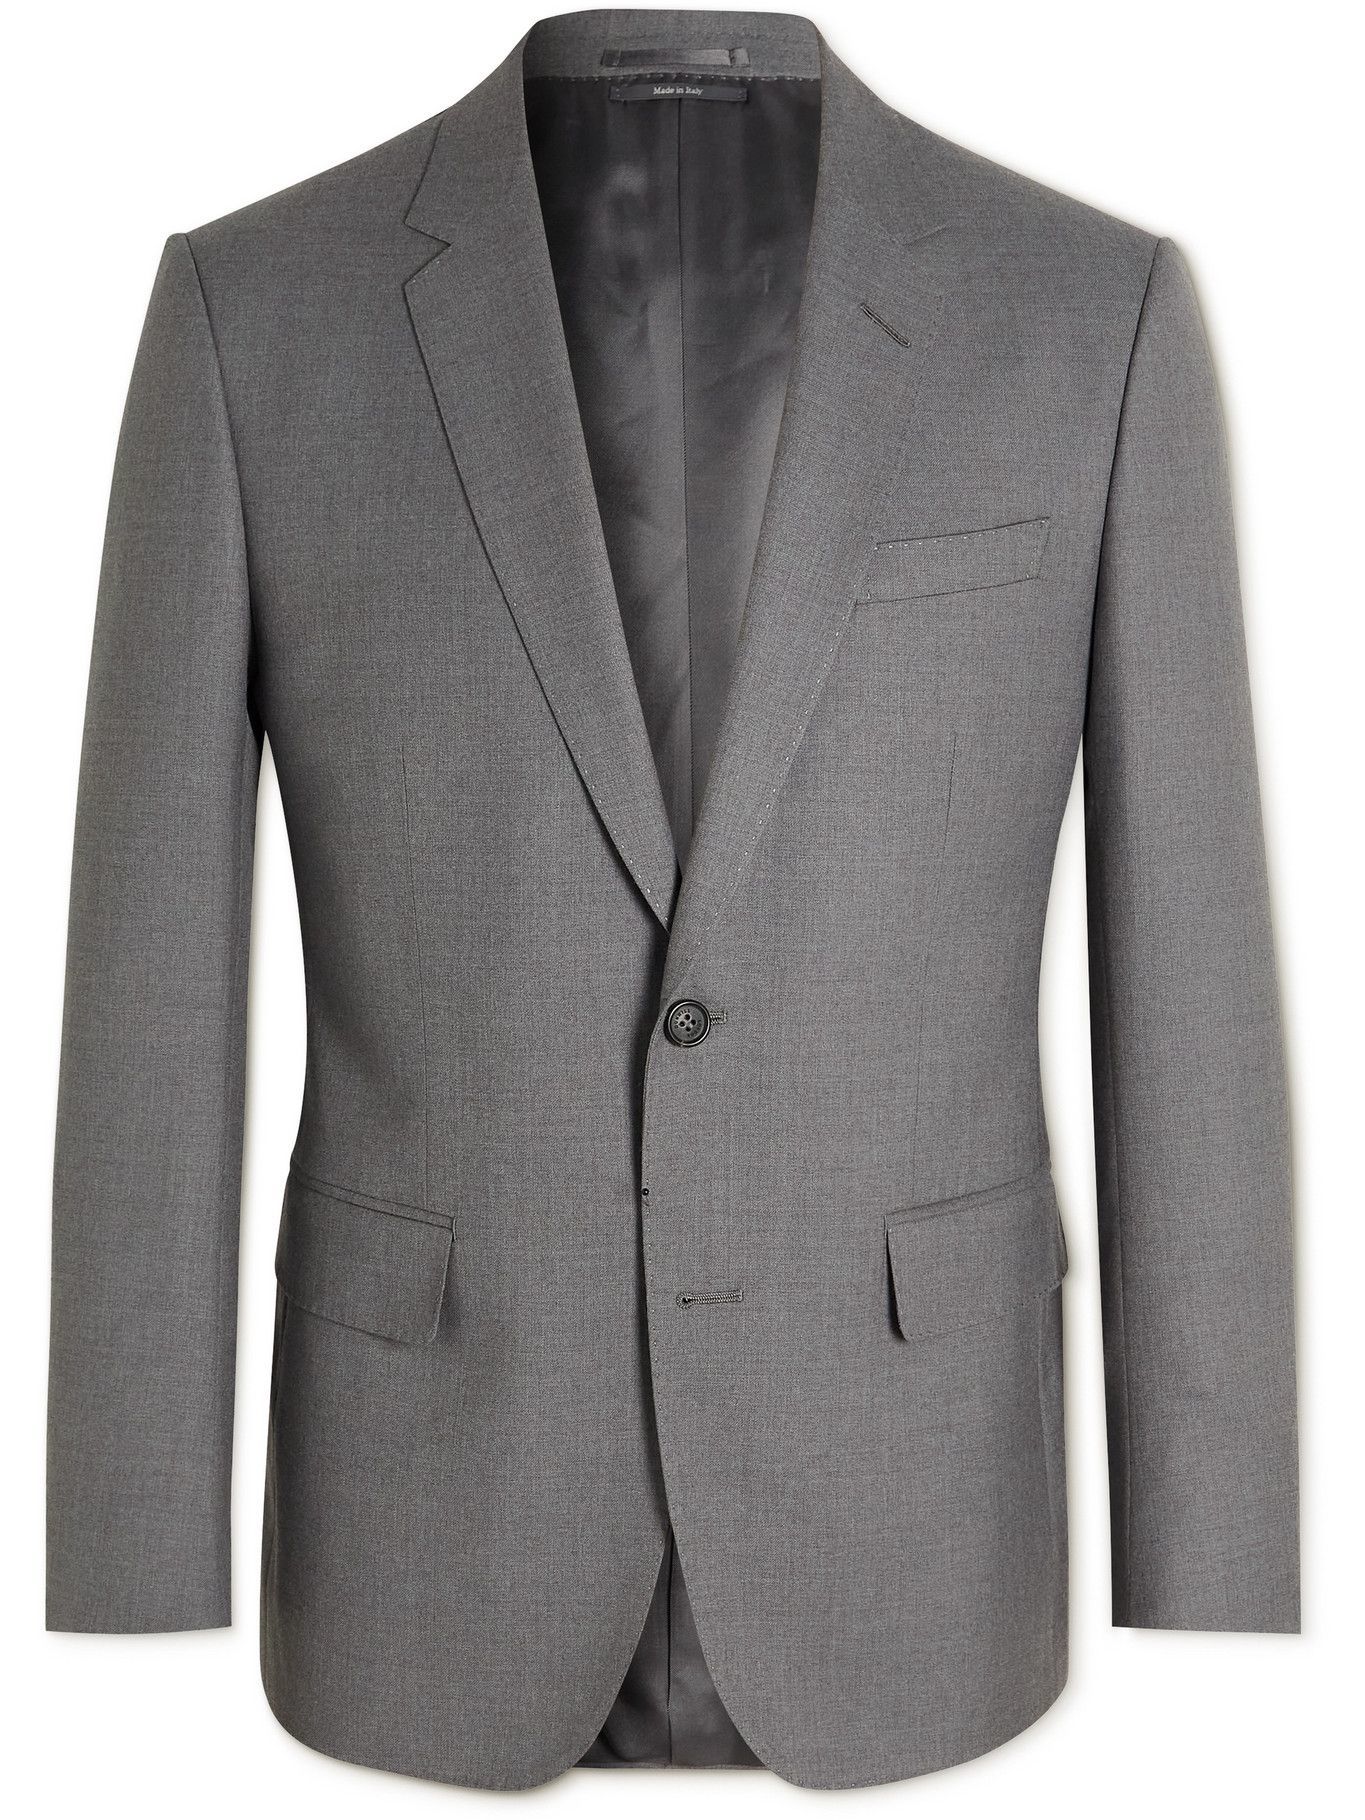 DUNHILL - Mayfair Slim-Fit Super 150s Wool Suit Jacket - Gray Dunhill